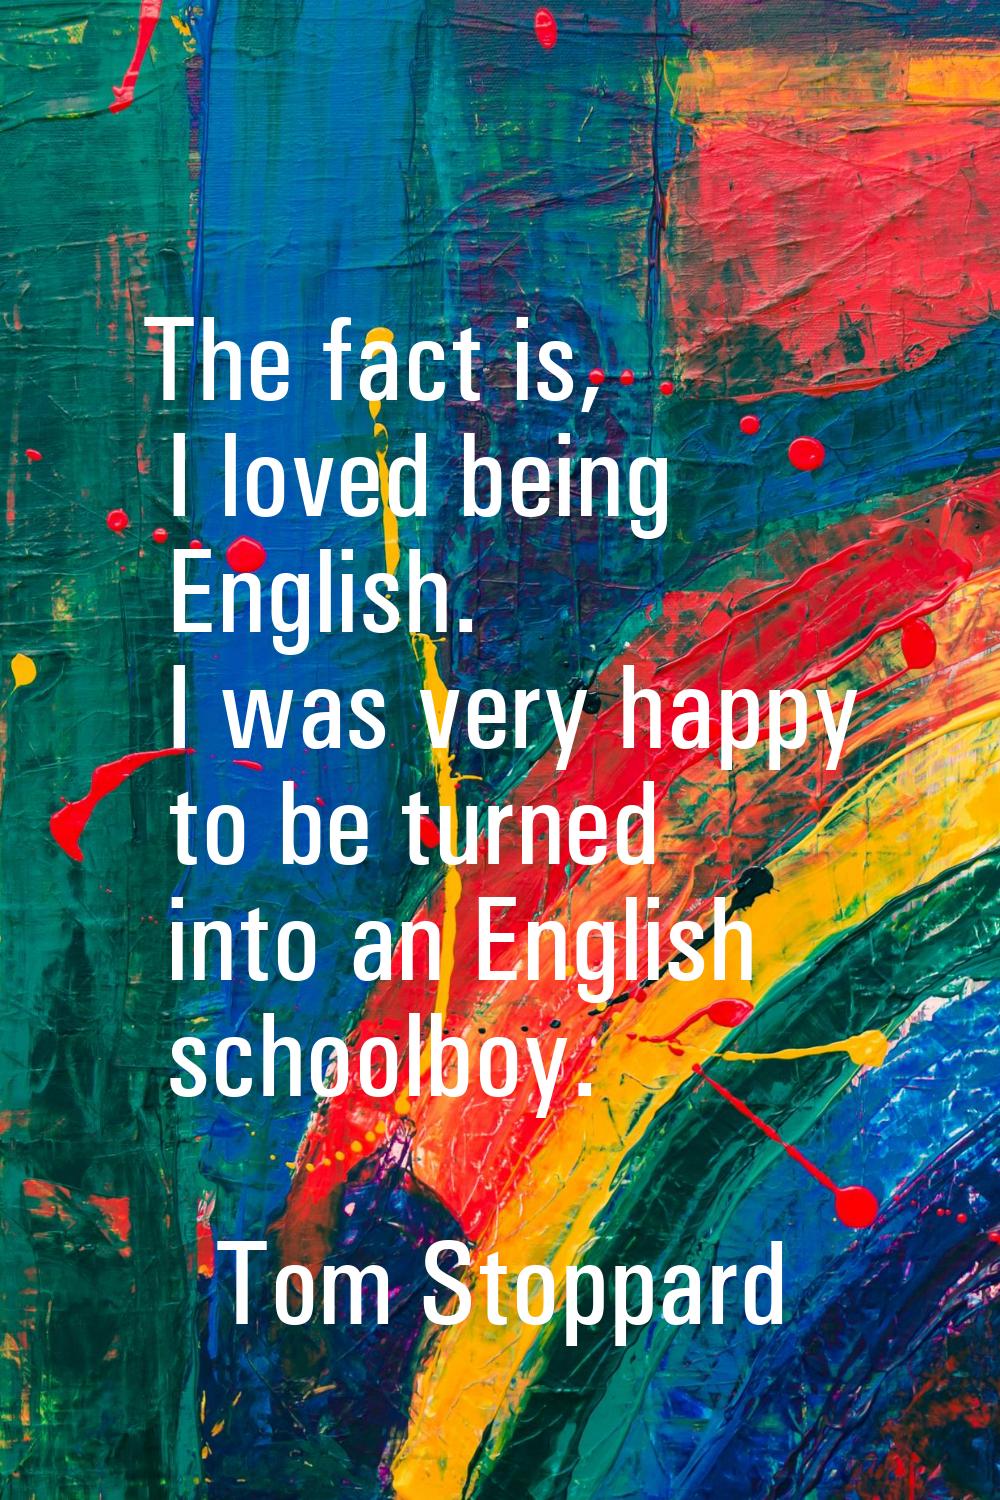 The fact is, I loved being English. I was very happy to be turned into an English schoolboy.